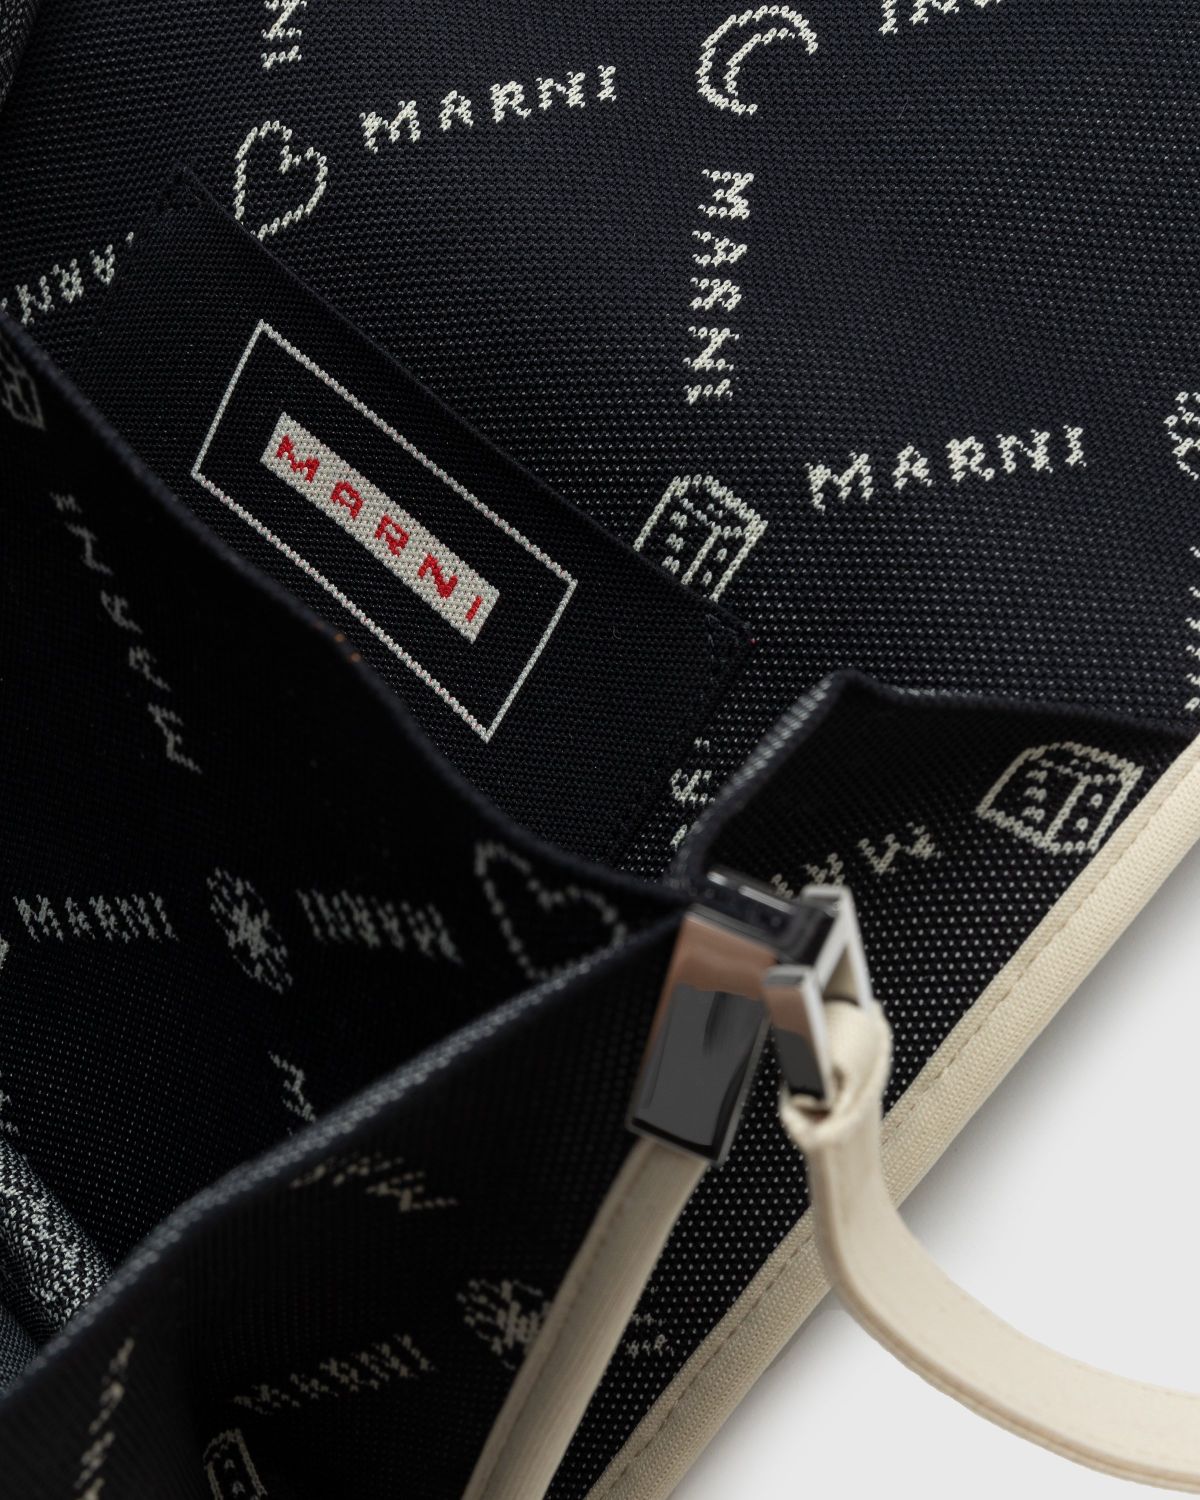 Marni unveil the new Trunk Soft bag for Autumn/Winter